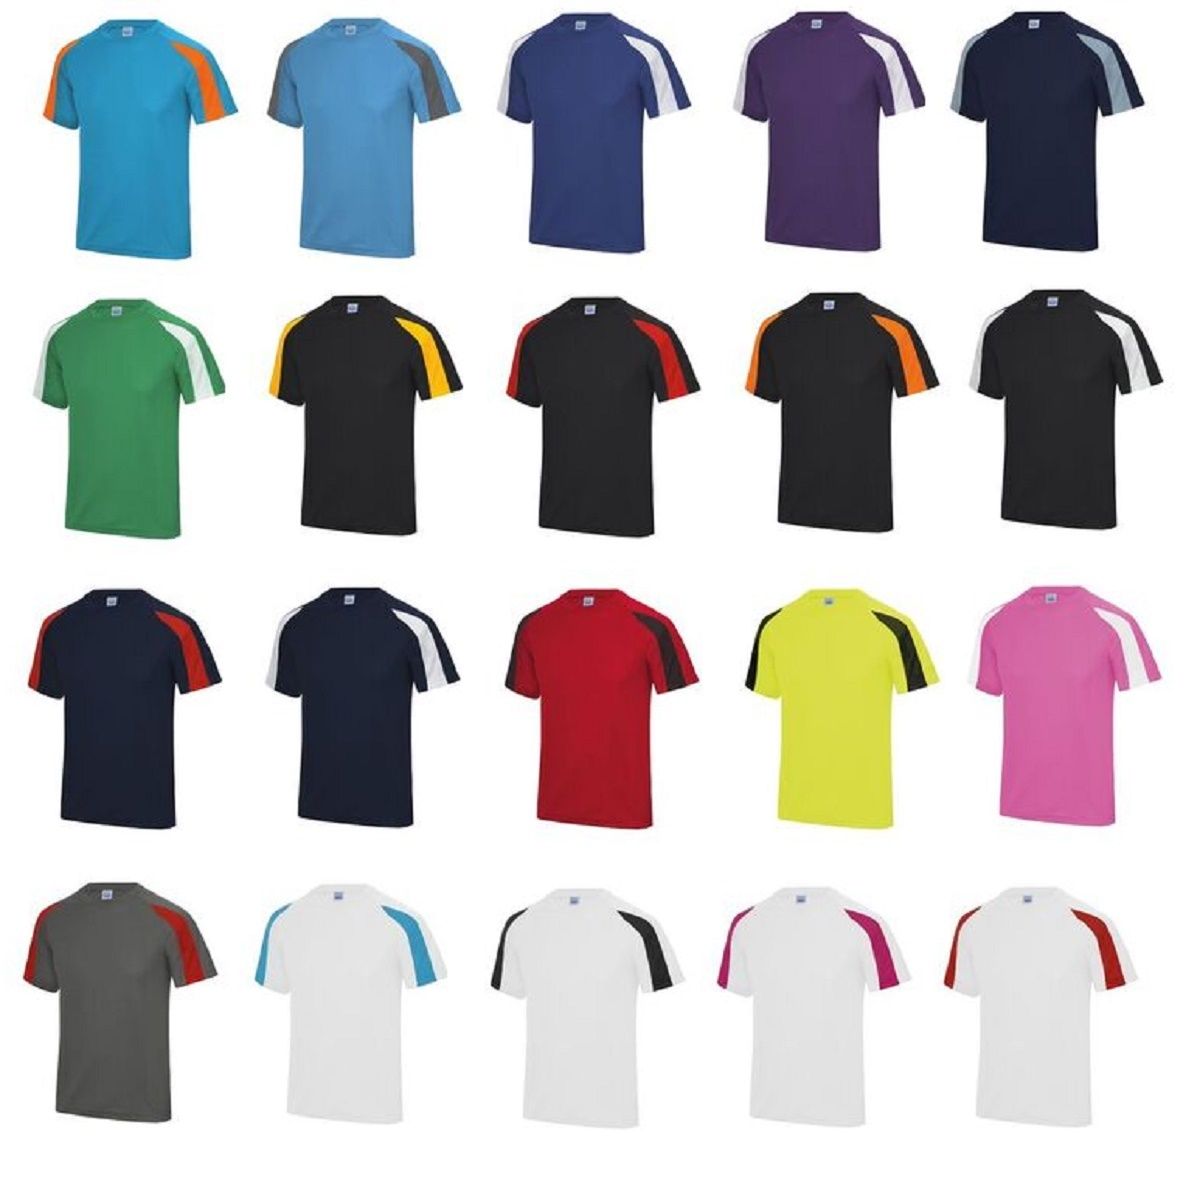 Contrast Cool T Shirt Wickable Breathable Running Training Football Sport Top BN